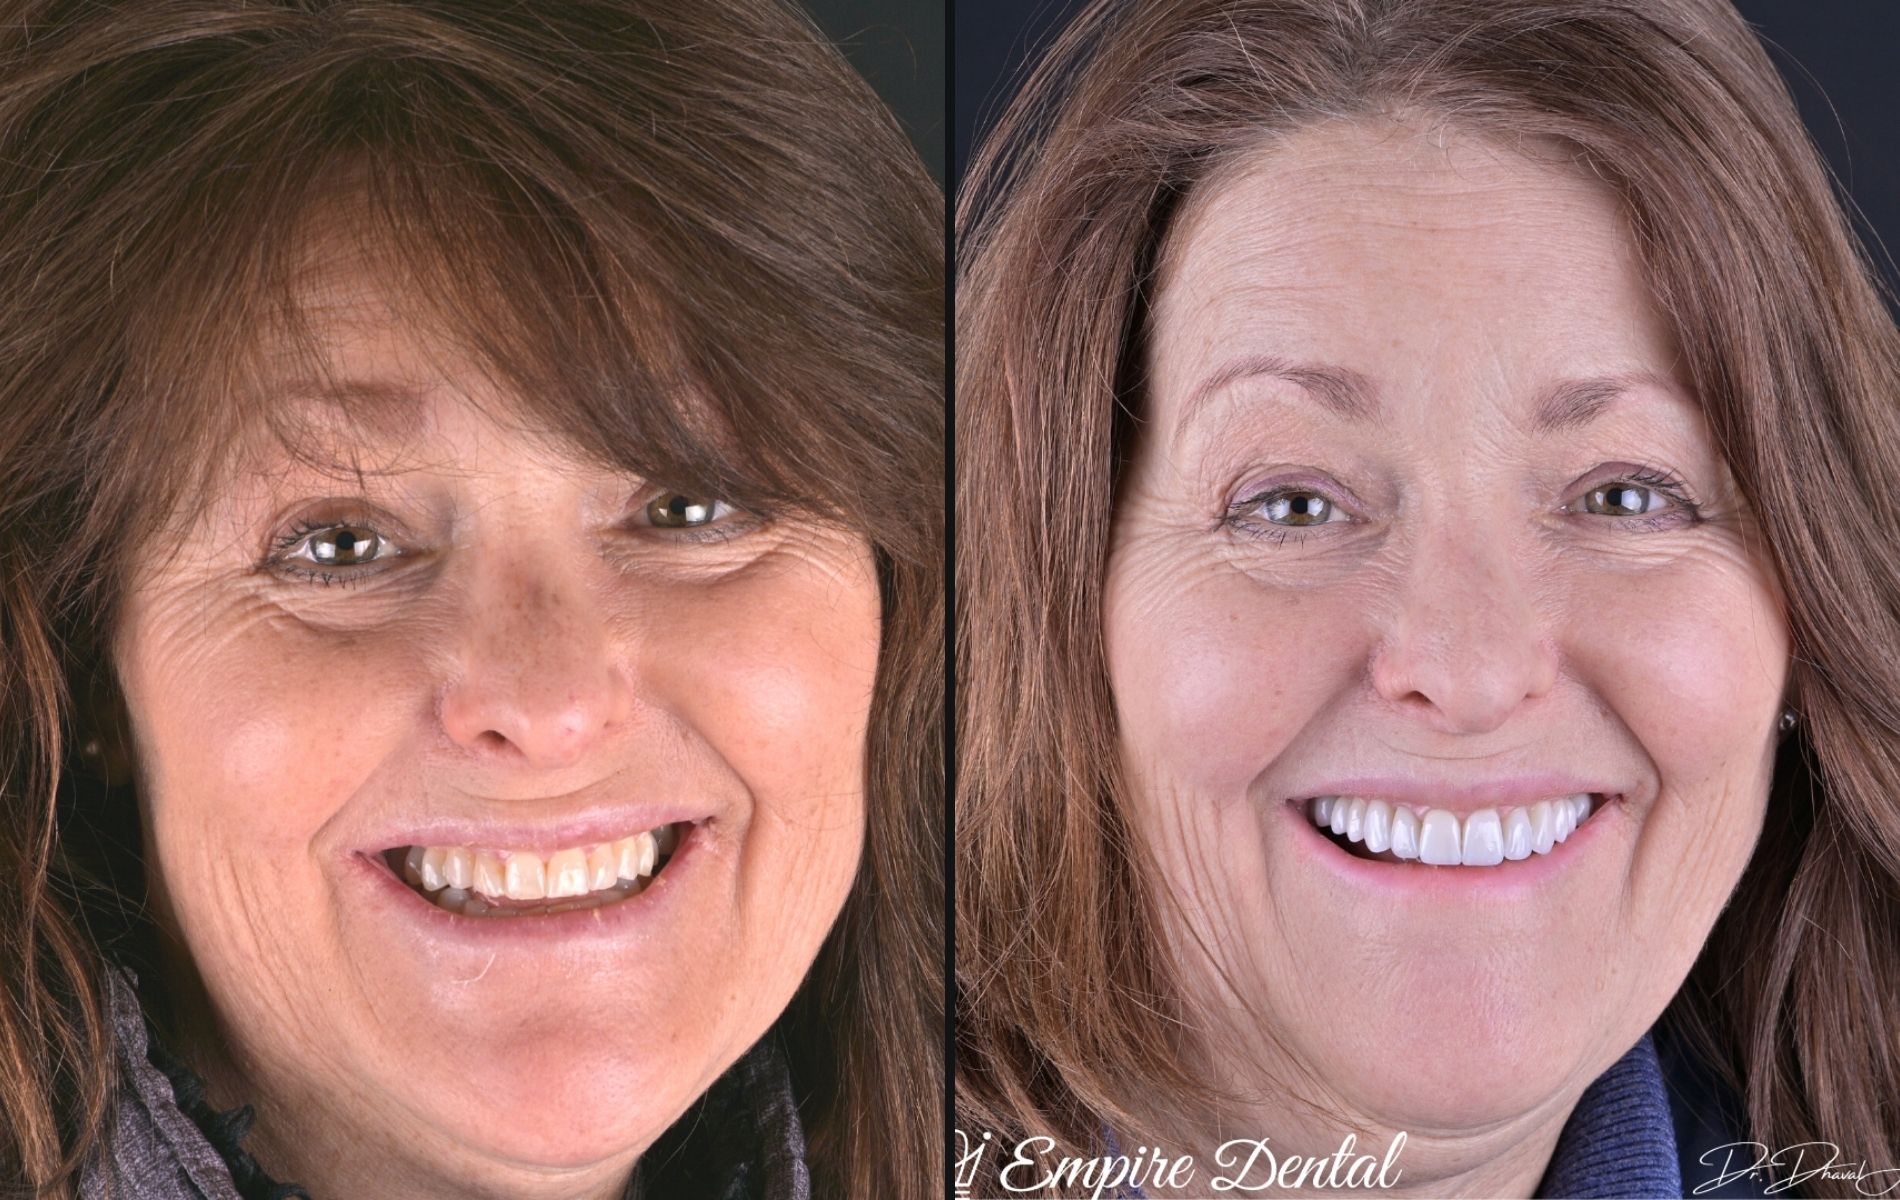 Empire Dental - Tracy before and after (1)